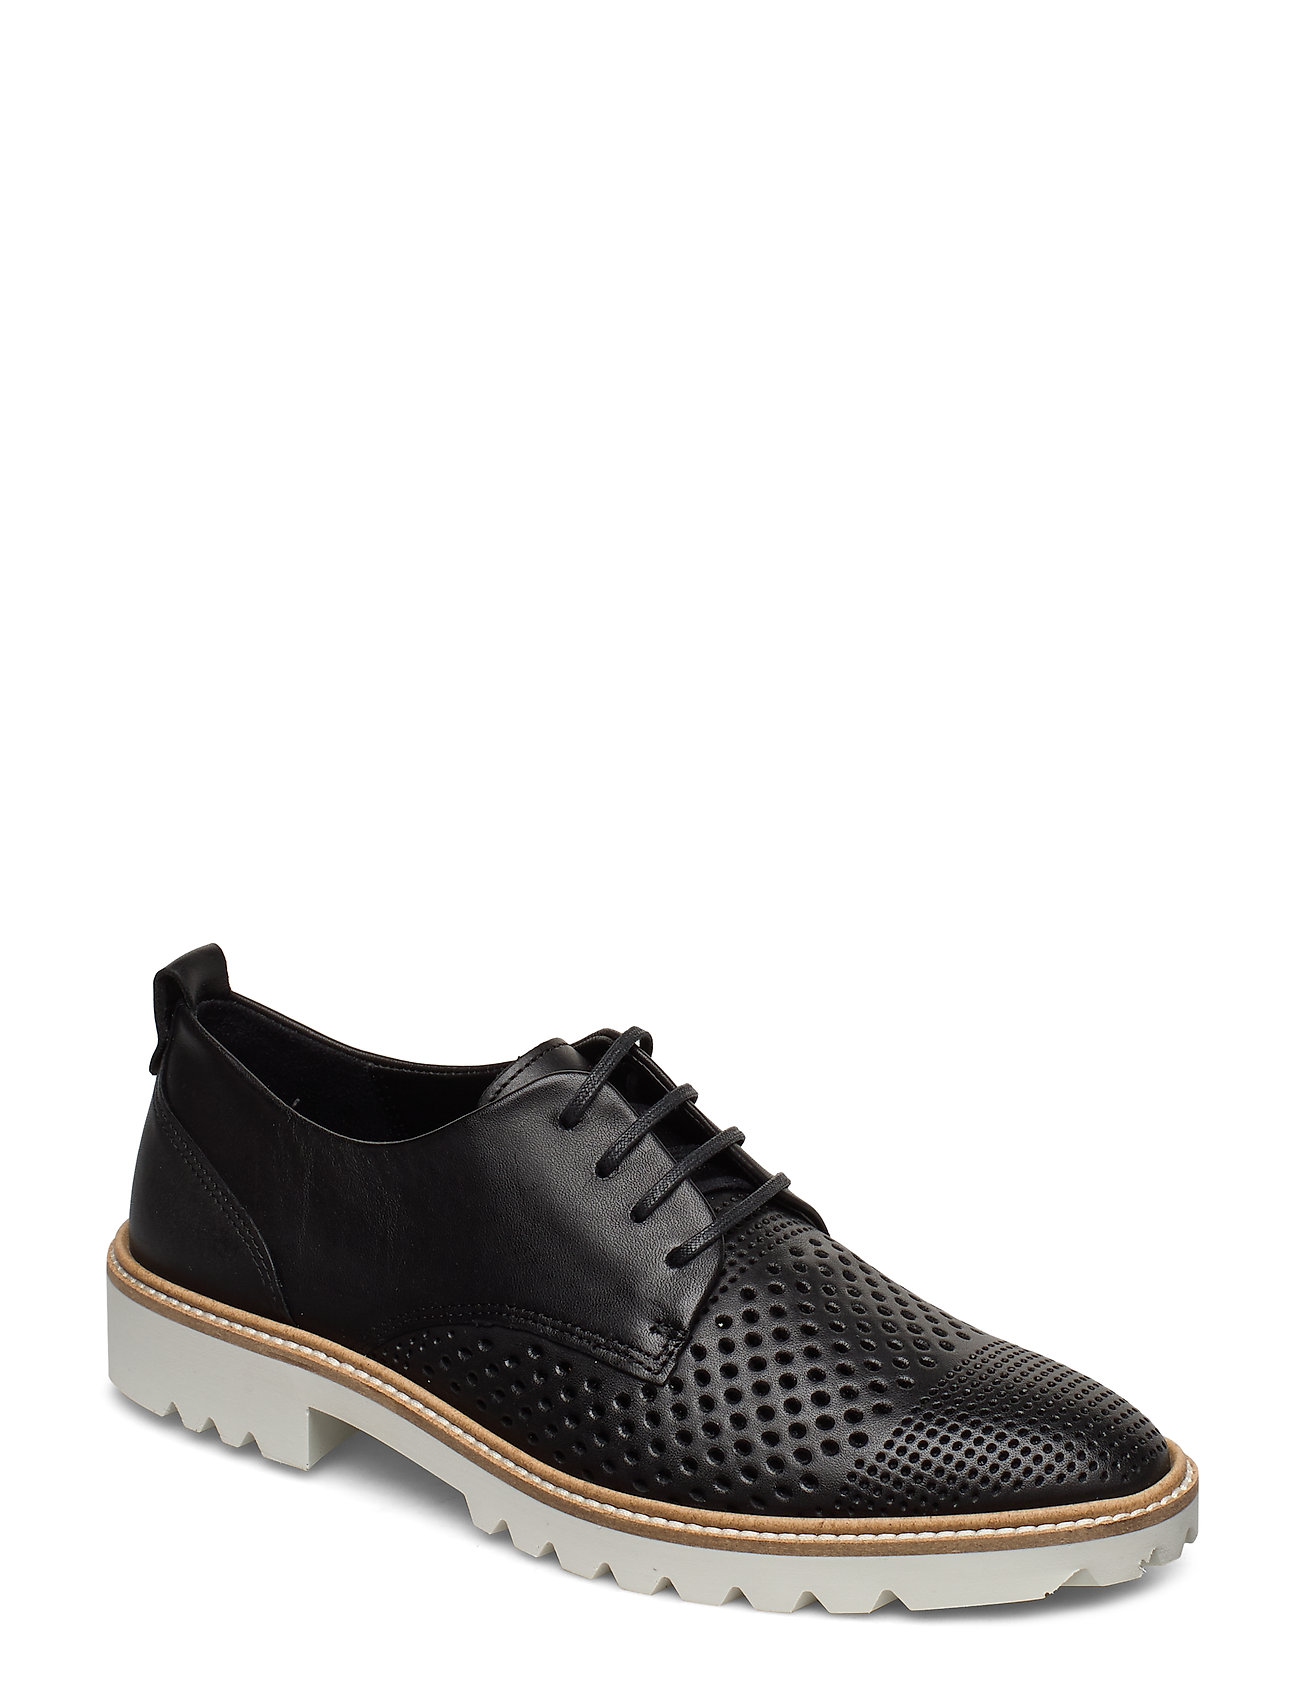 ECCO Incise Tailored - Laced shoes - Boozt.com